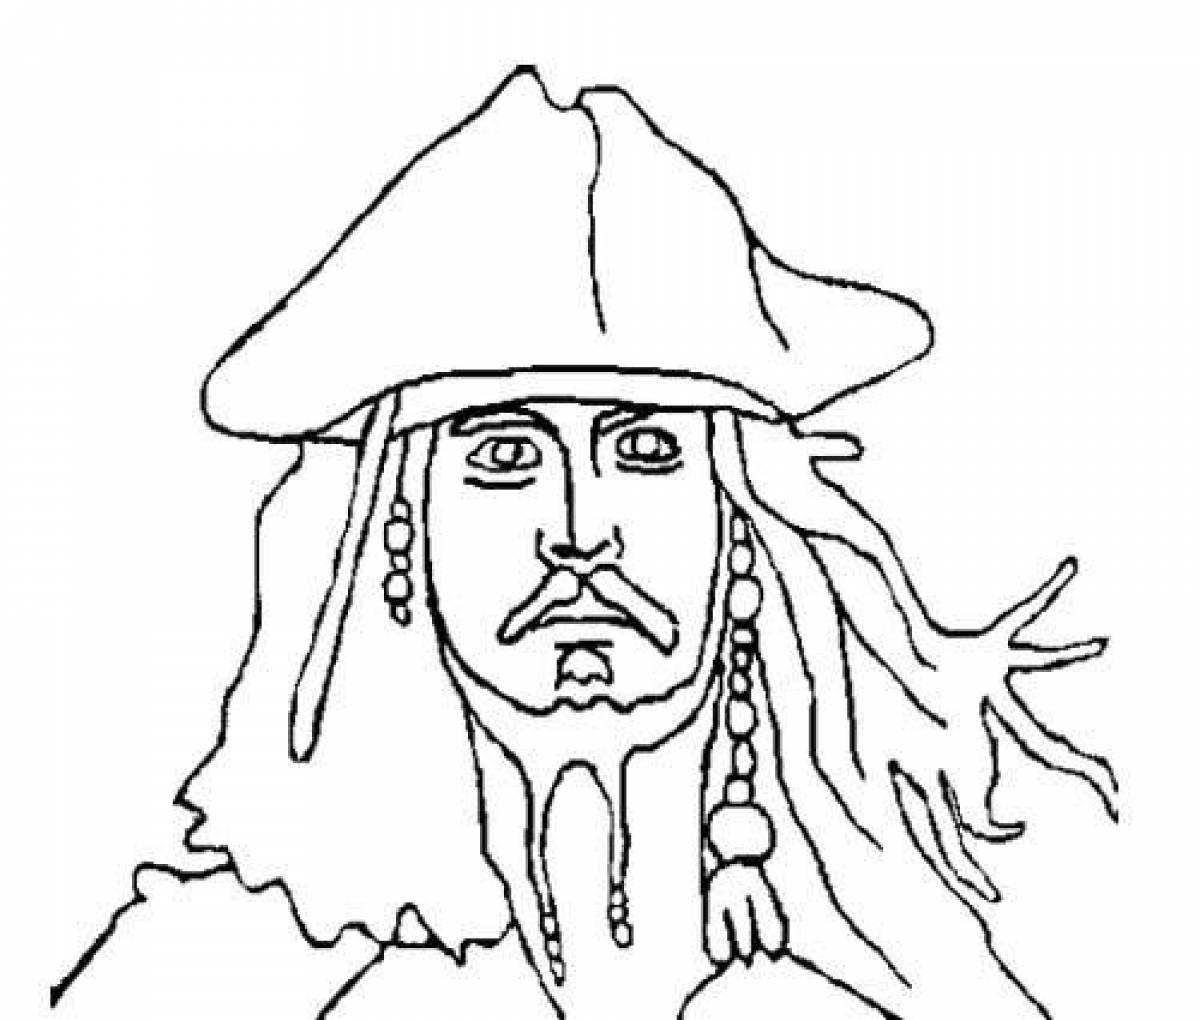 Jack Sparrow glitter coloring book